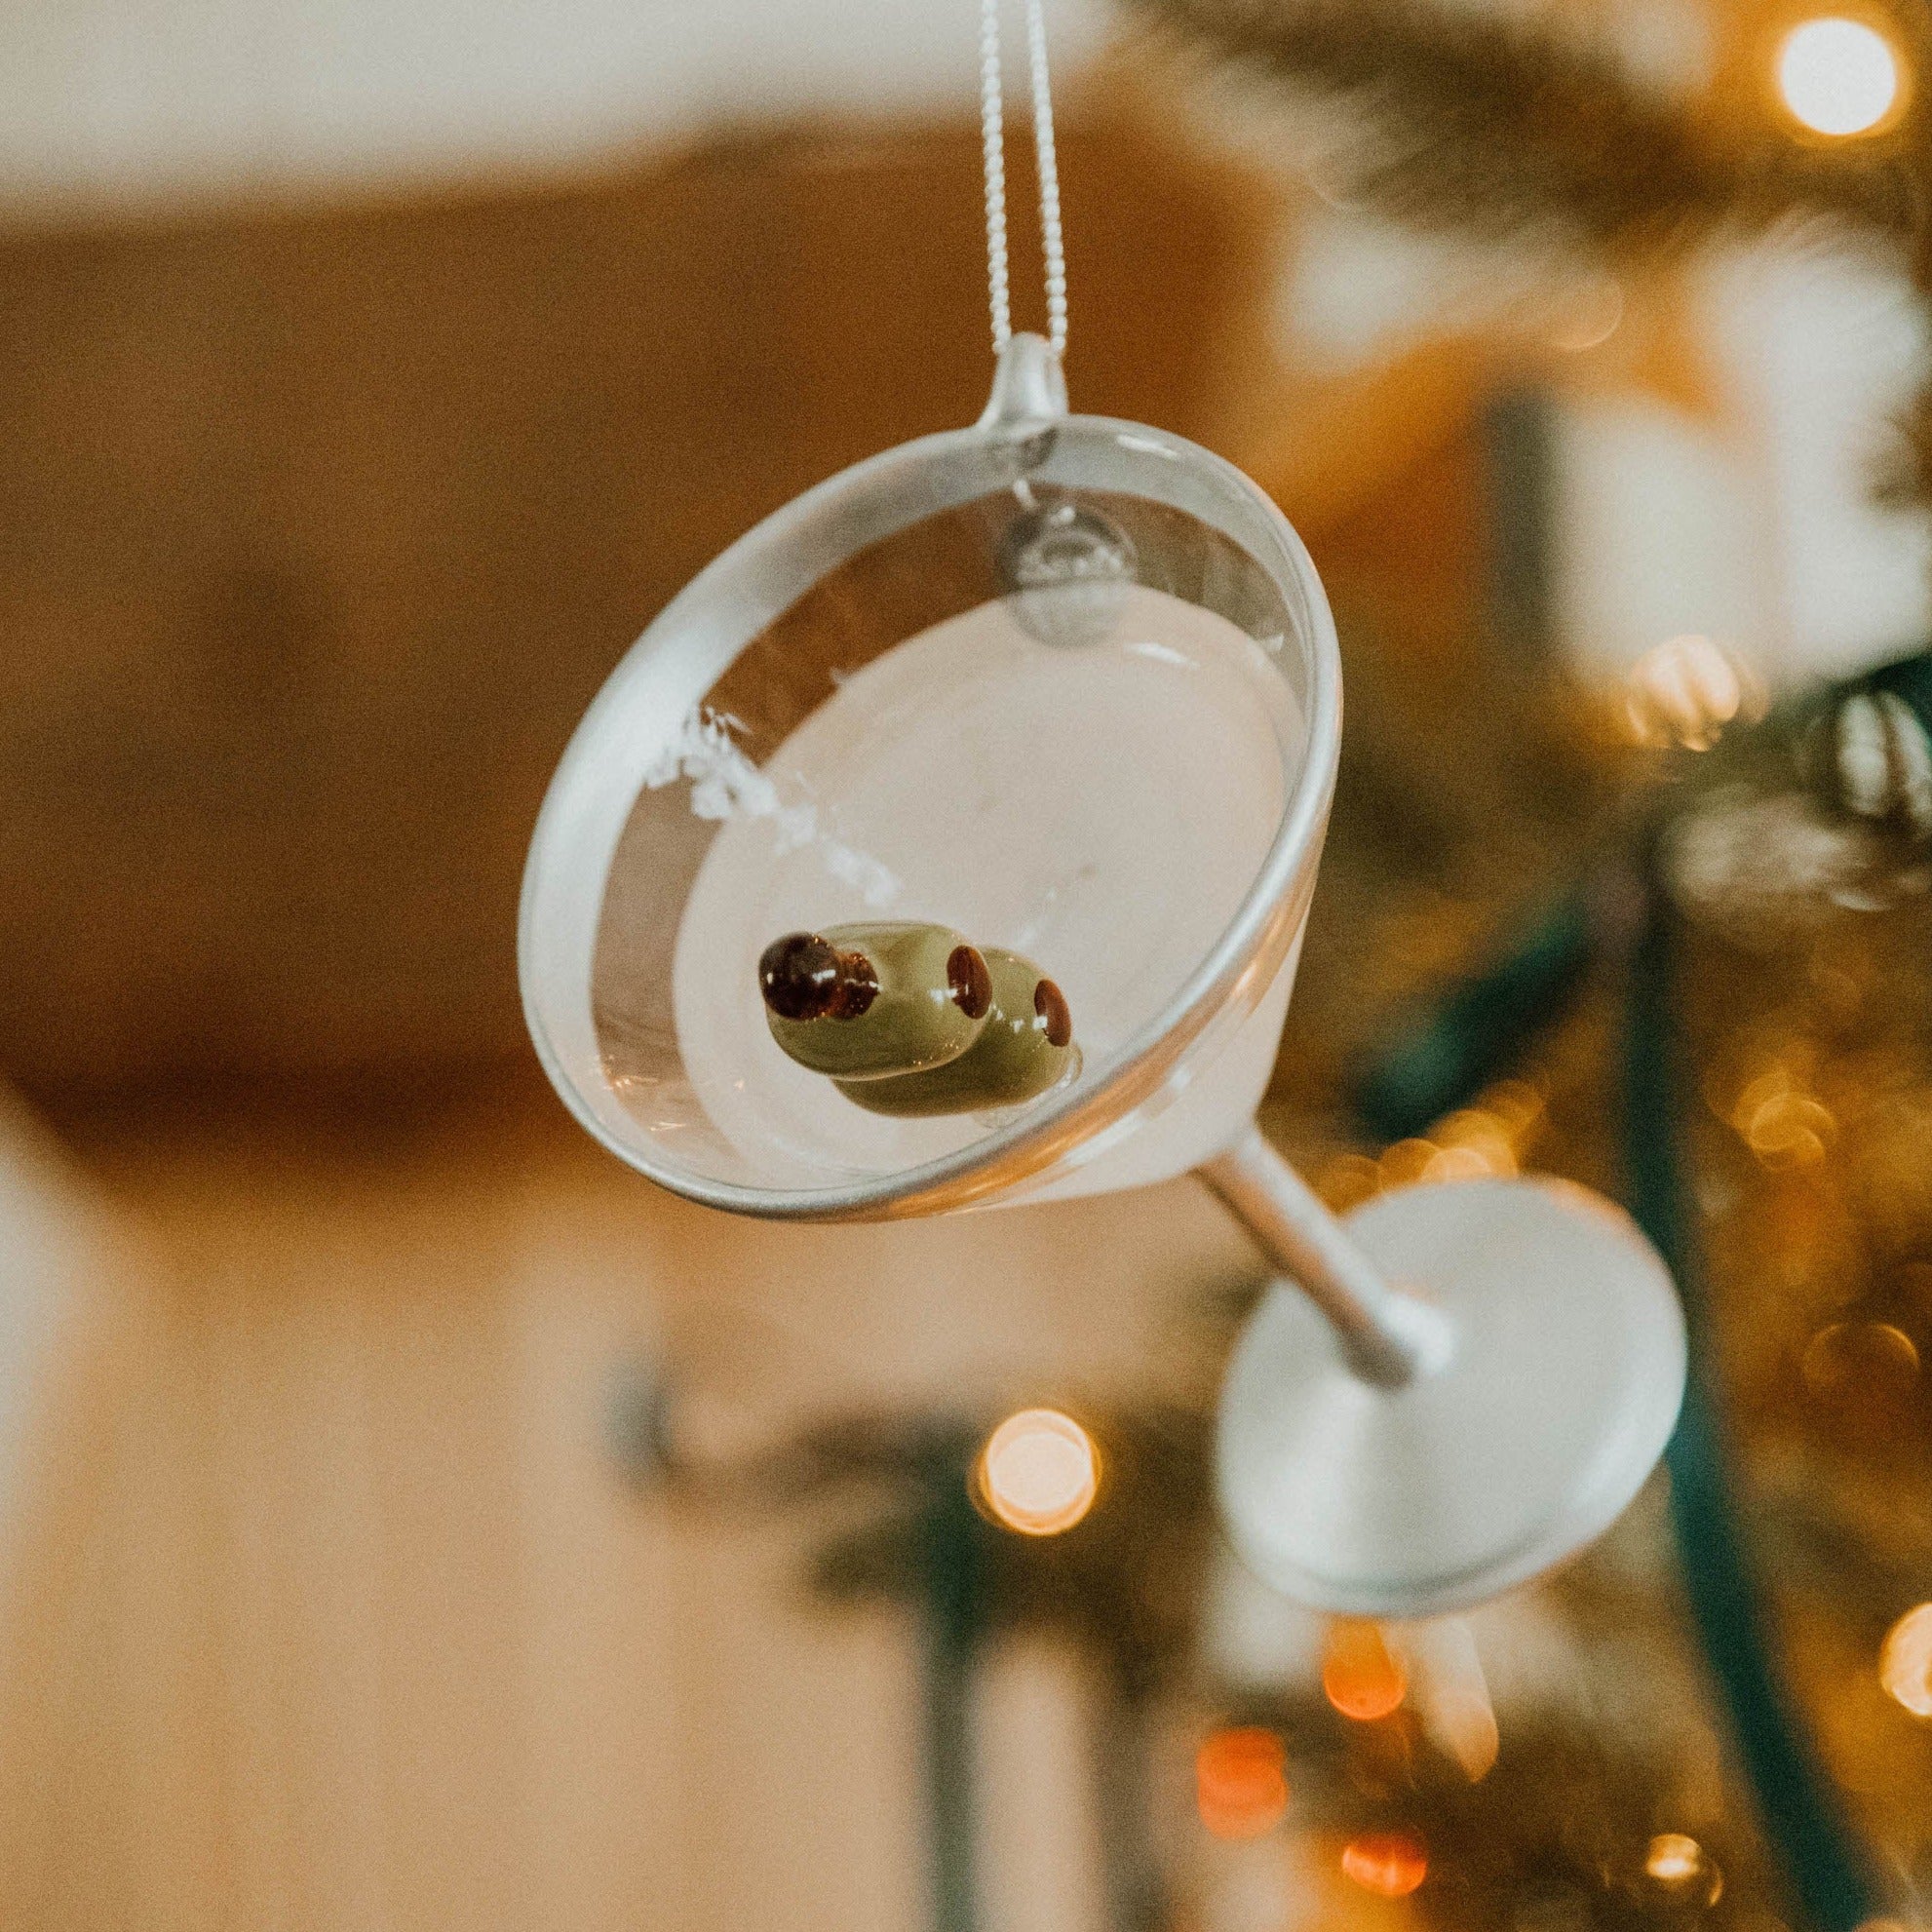 Martini Glass Ornament in Front of Tree